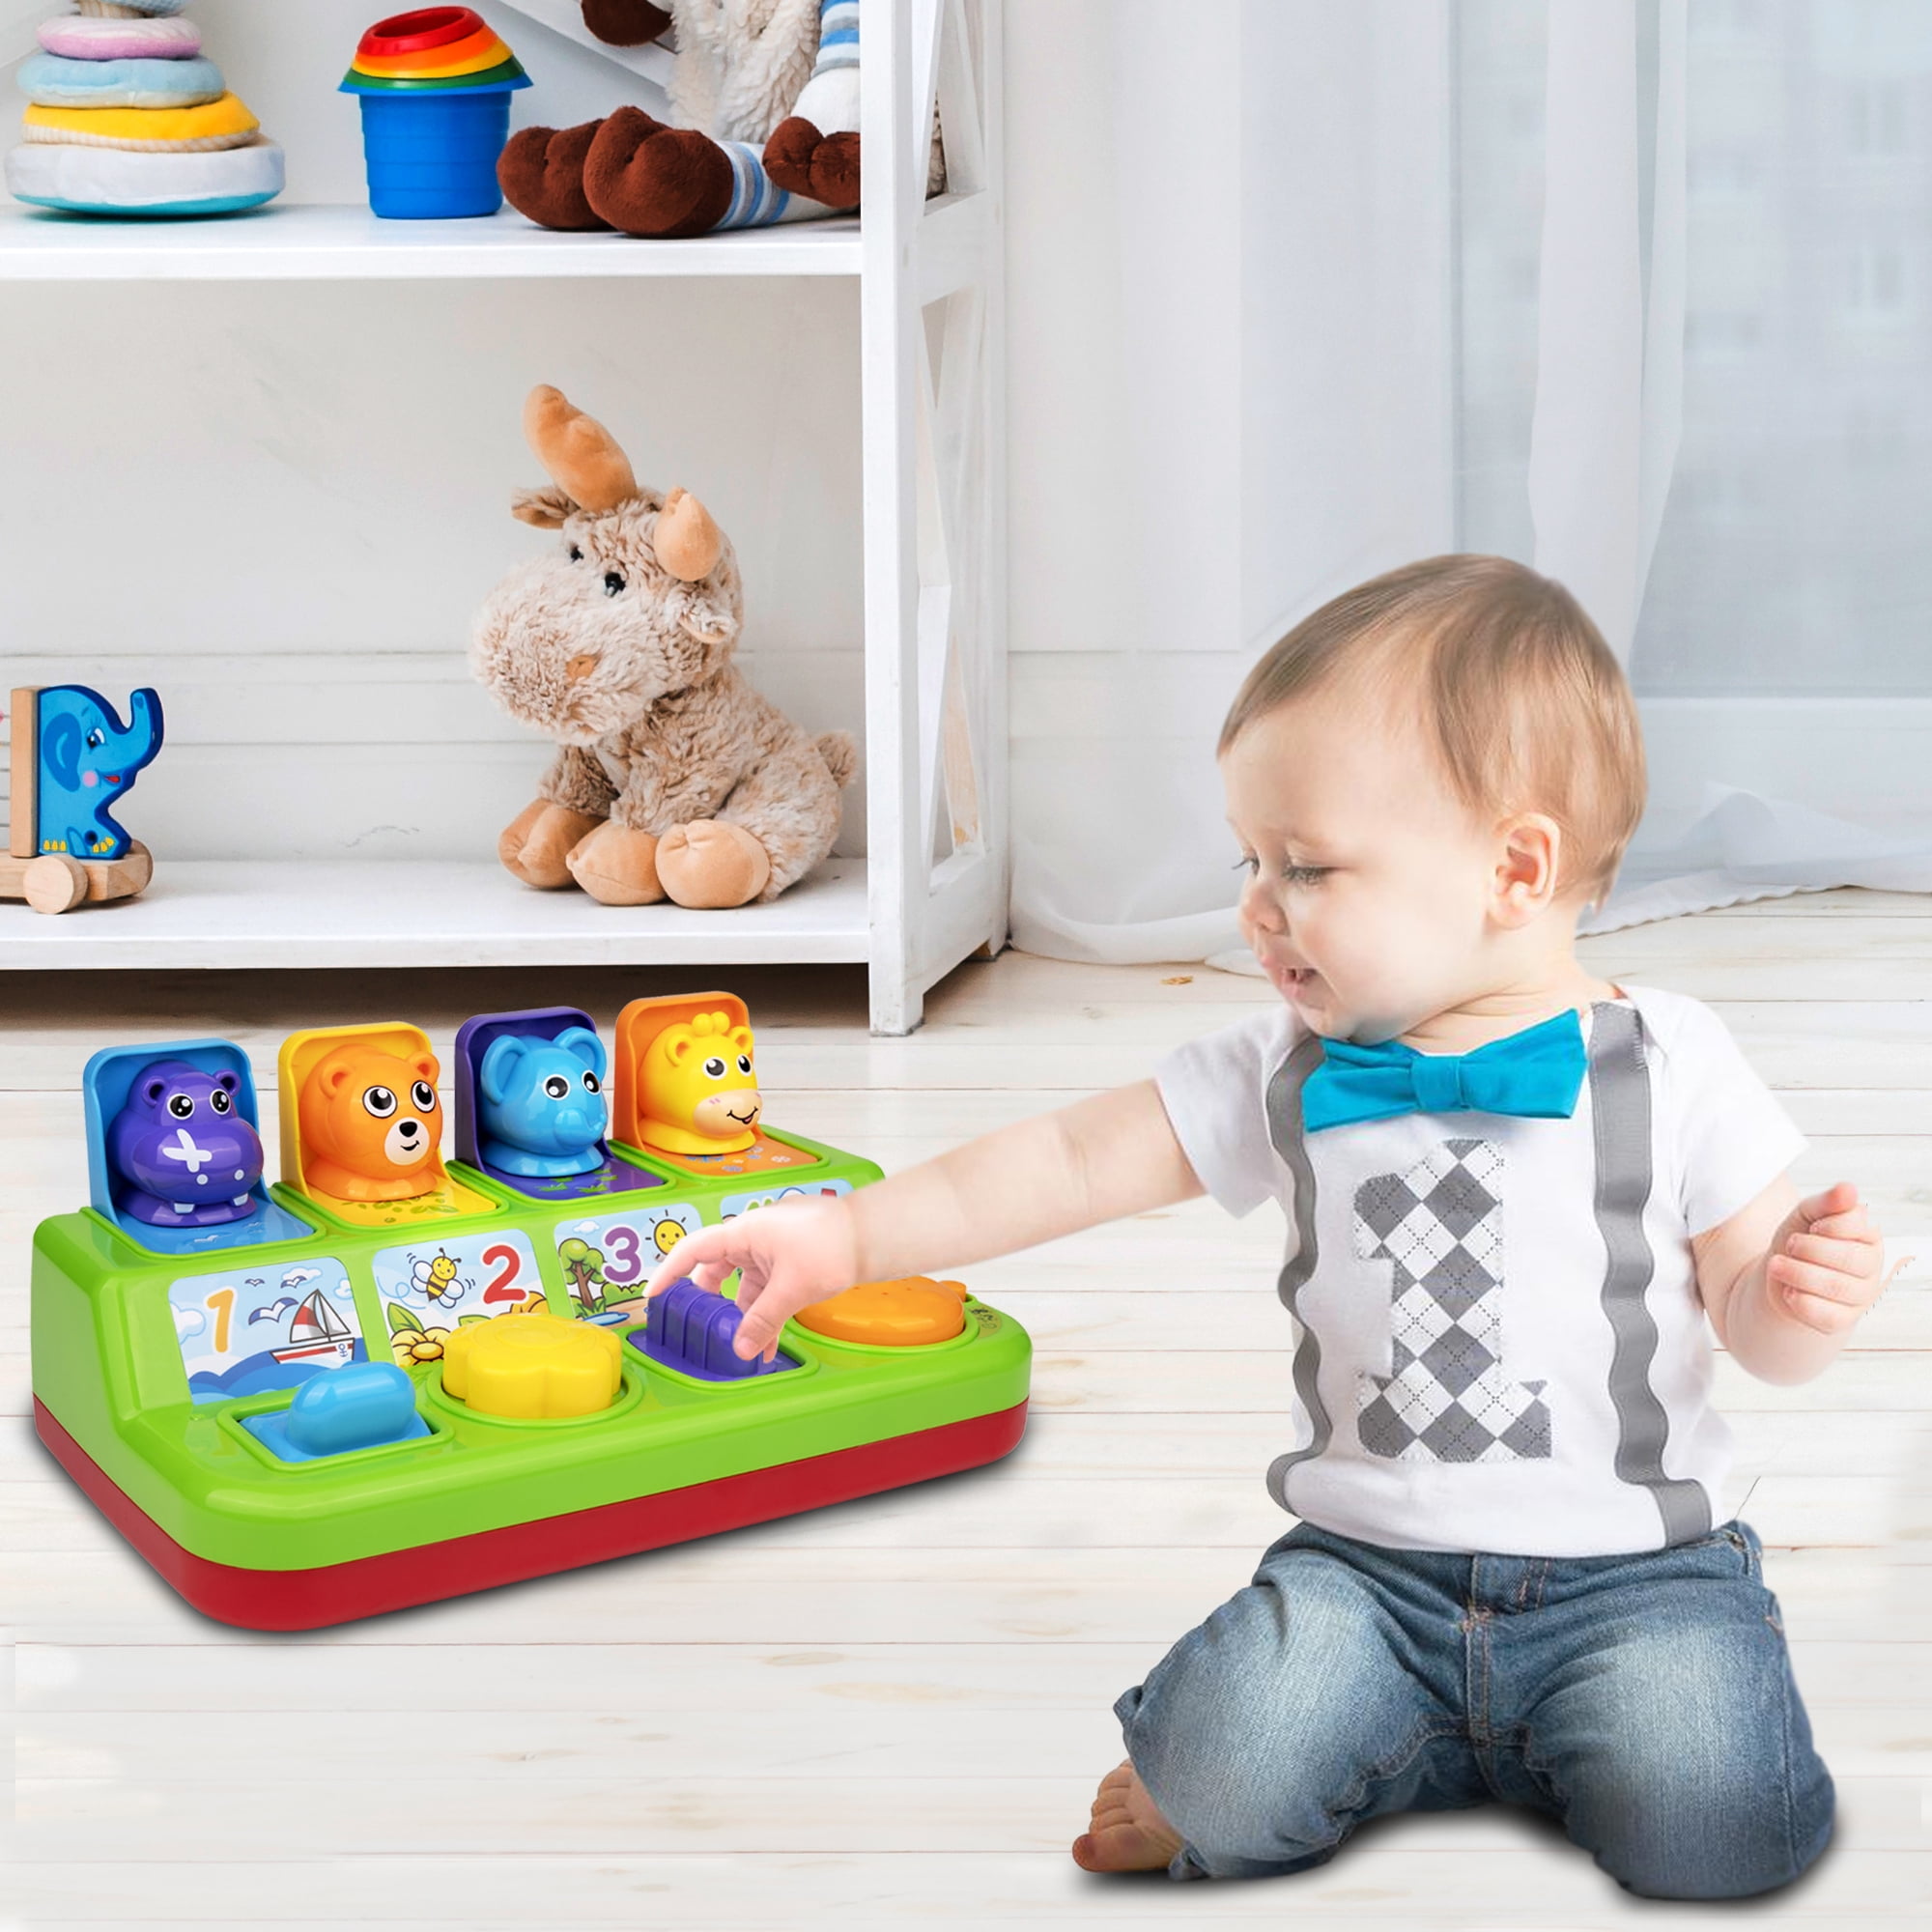 Playkidz Pop Up Toy, Toddler Music Cause Effect Toys, Interactive Animal Sounds, 10 month baby -1 year old & girl - Walmart.com